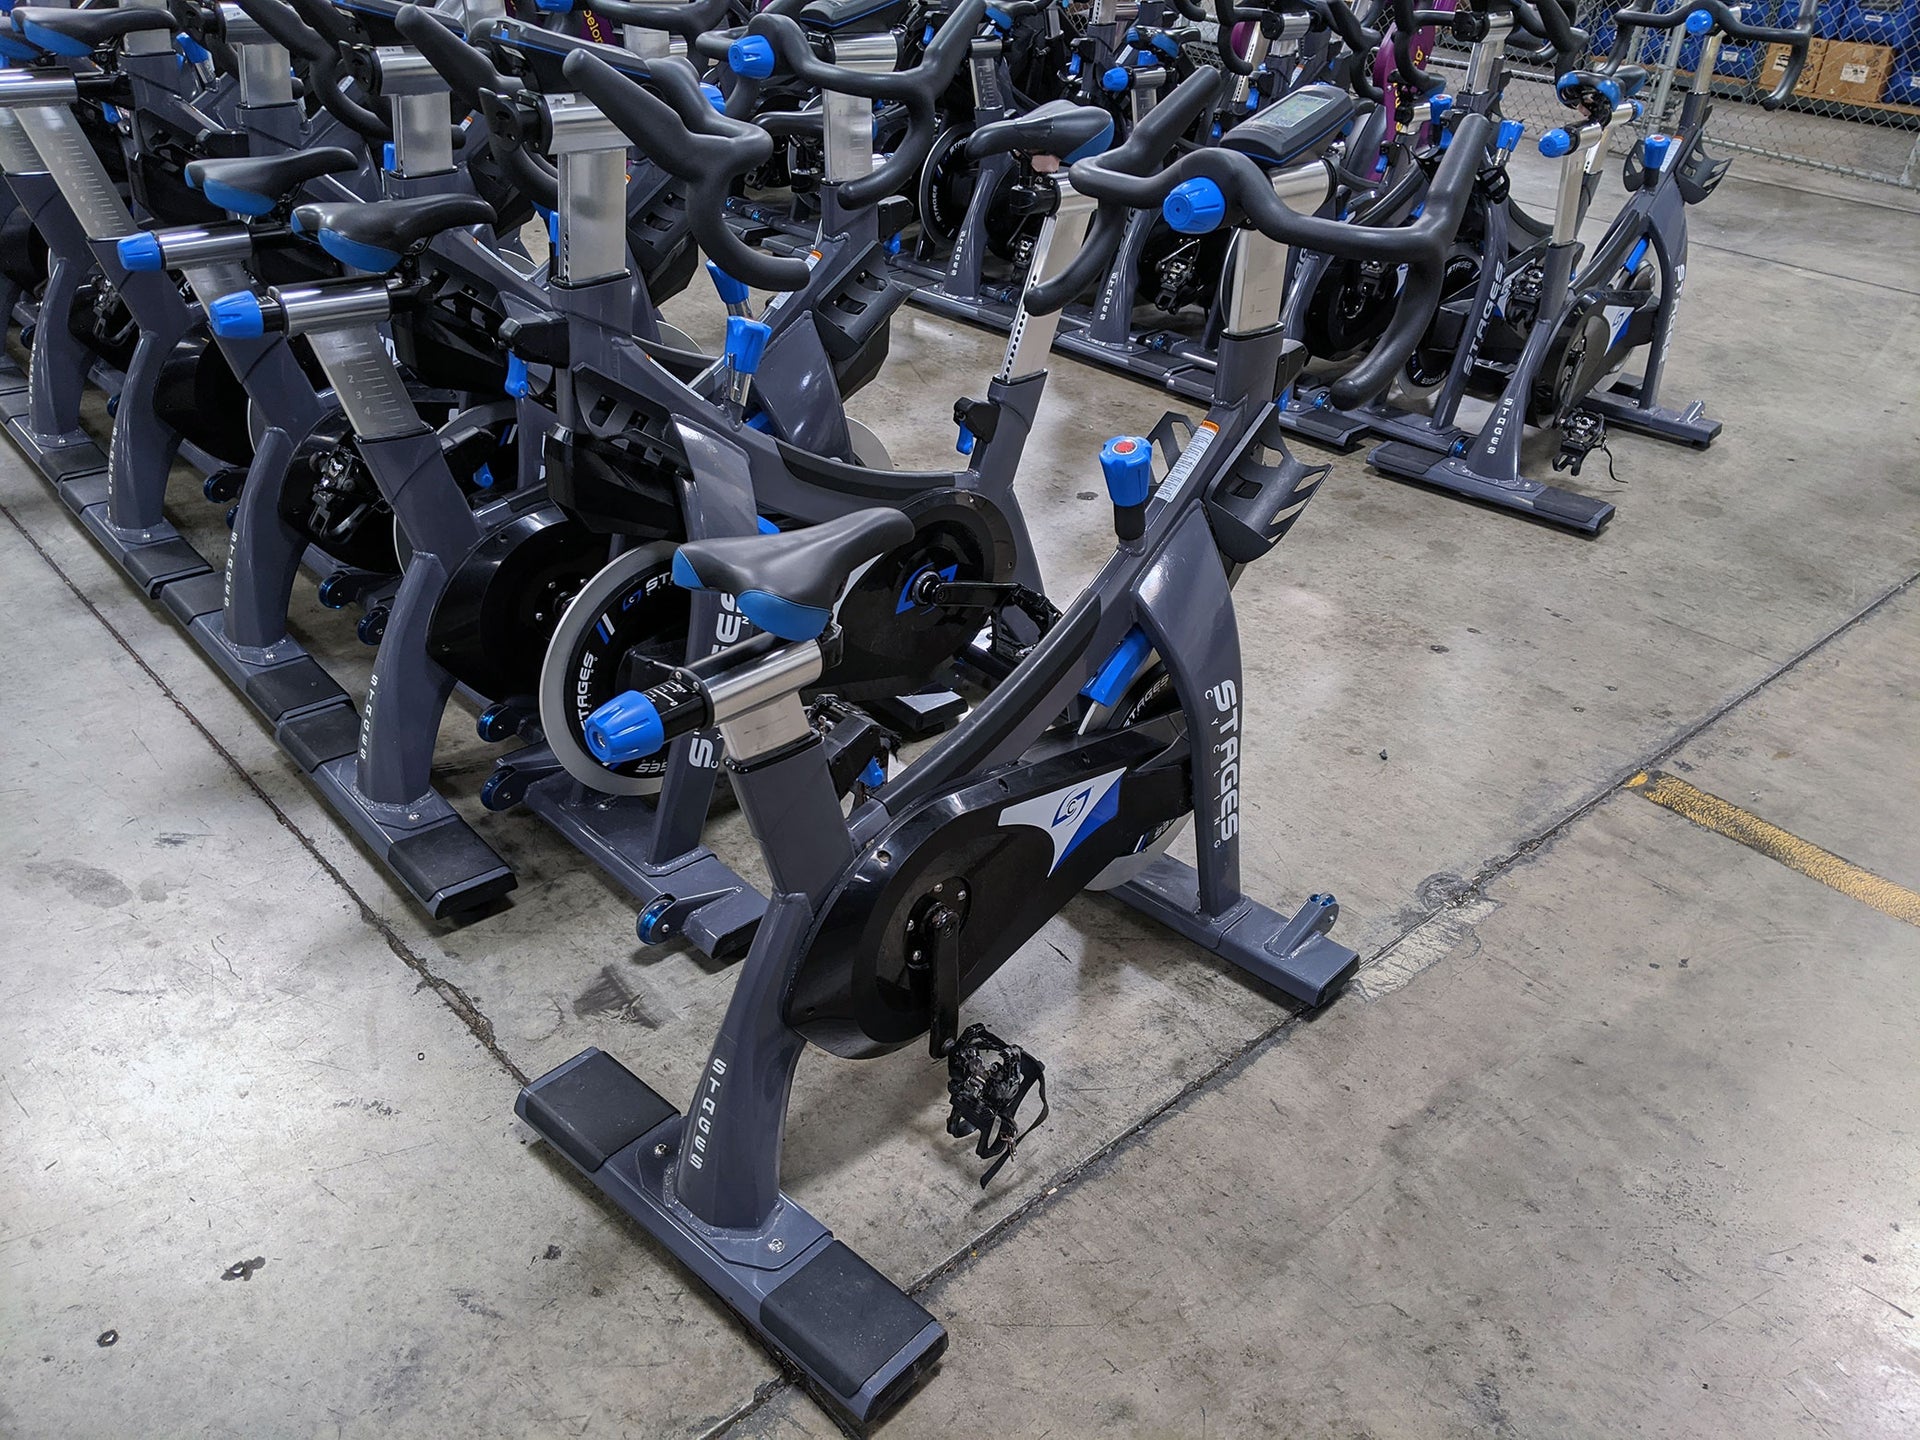 used indoor cycling bikes